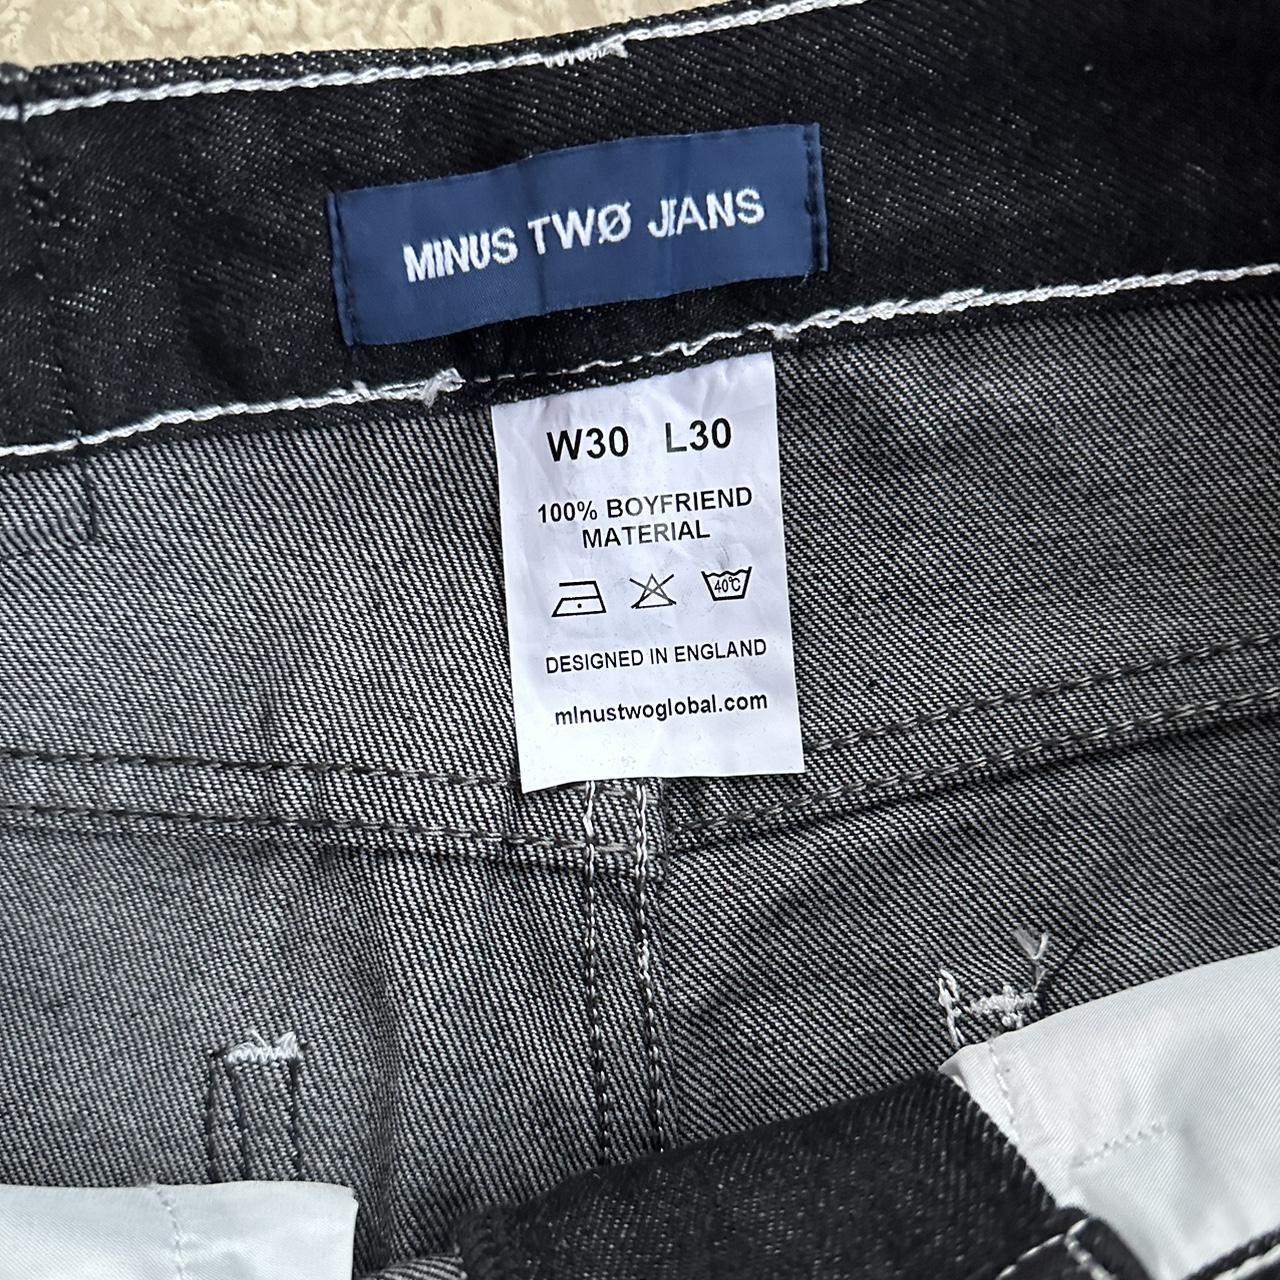 Minus two multi pocket jeans Great quality no... - Depop